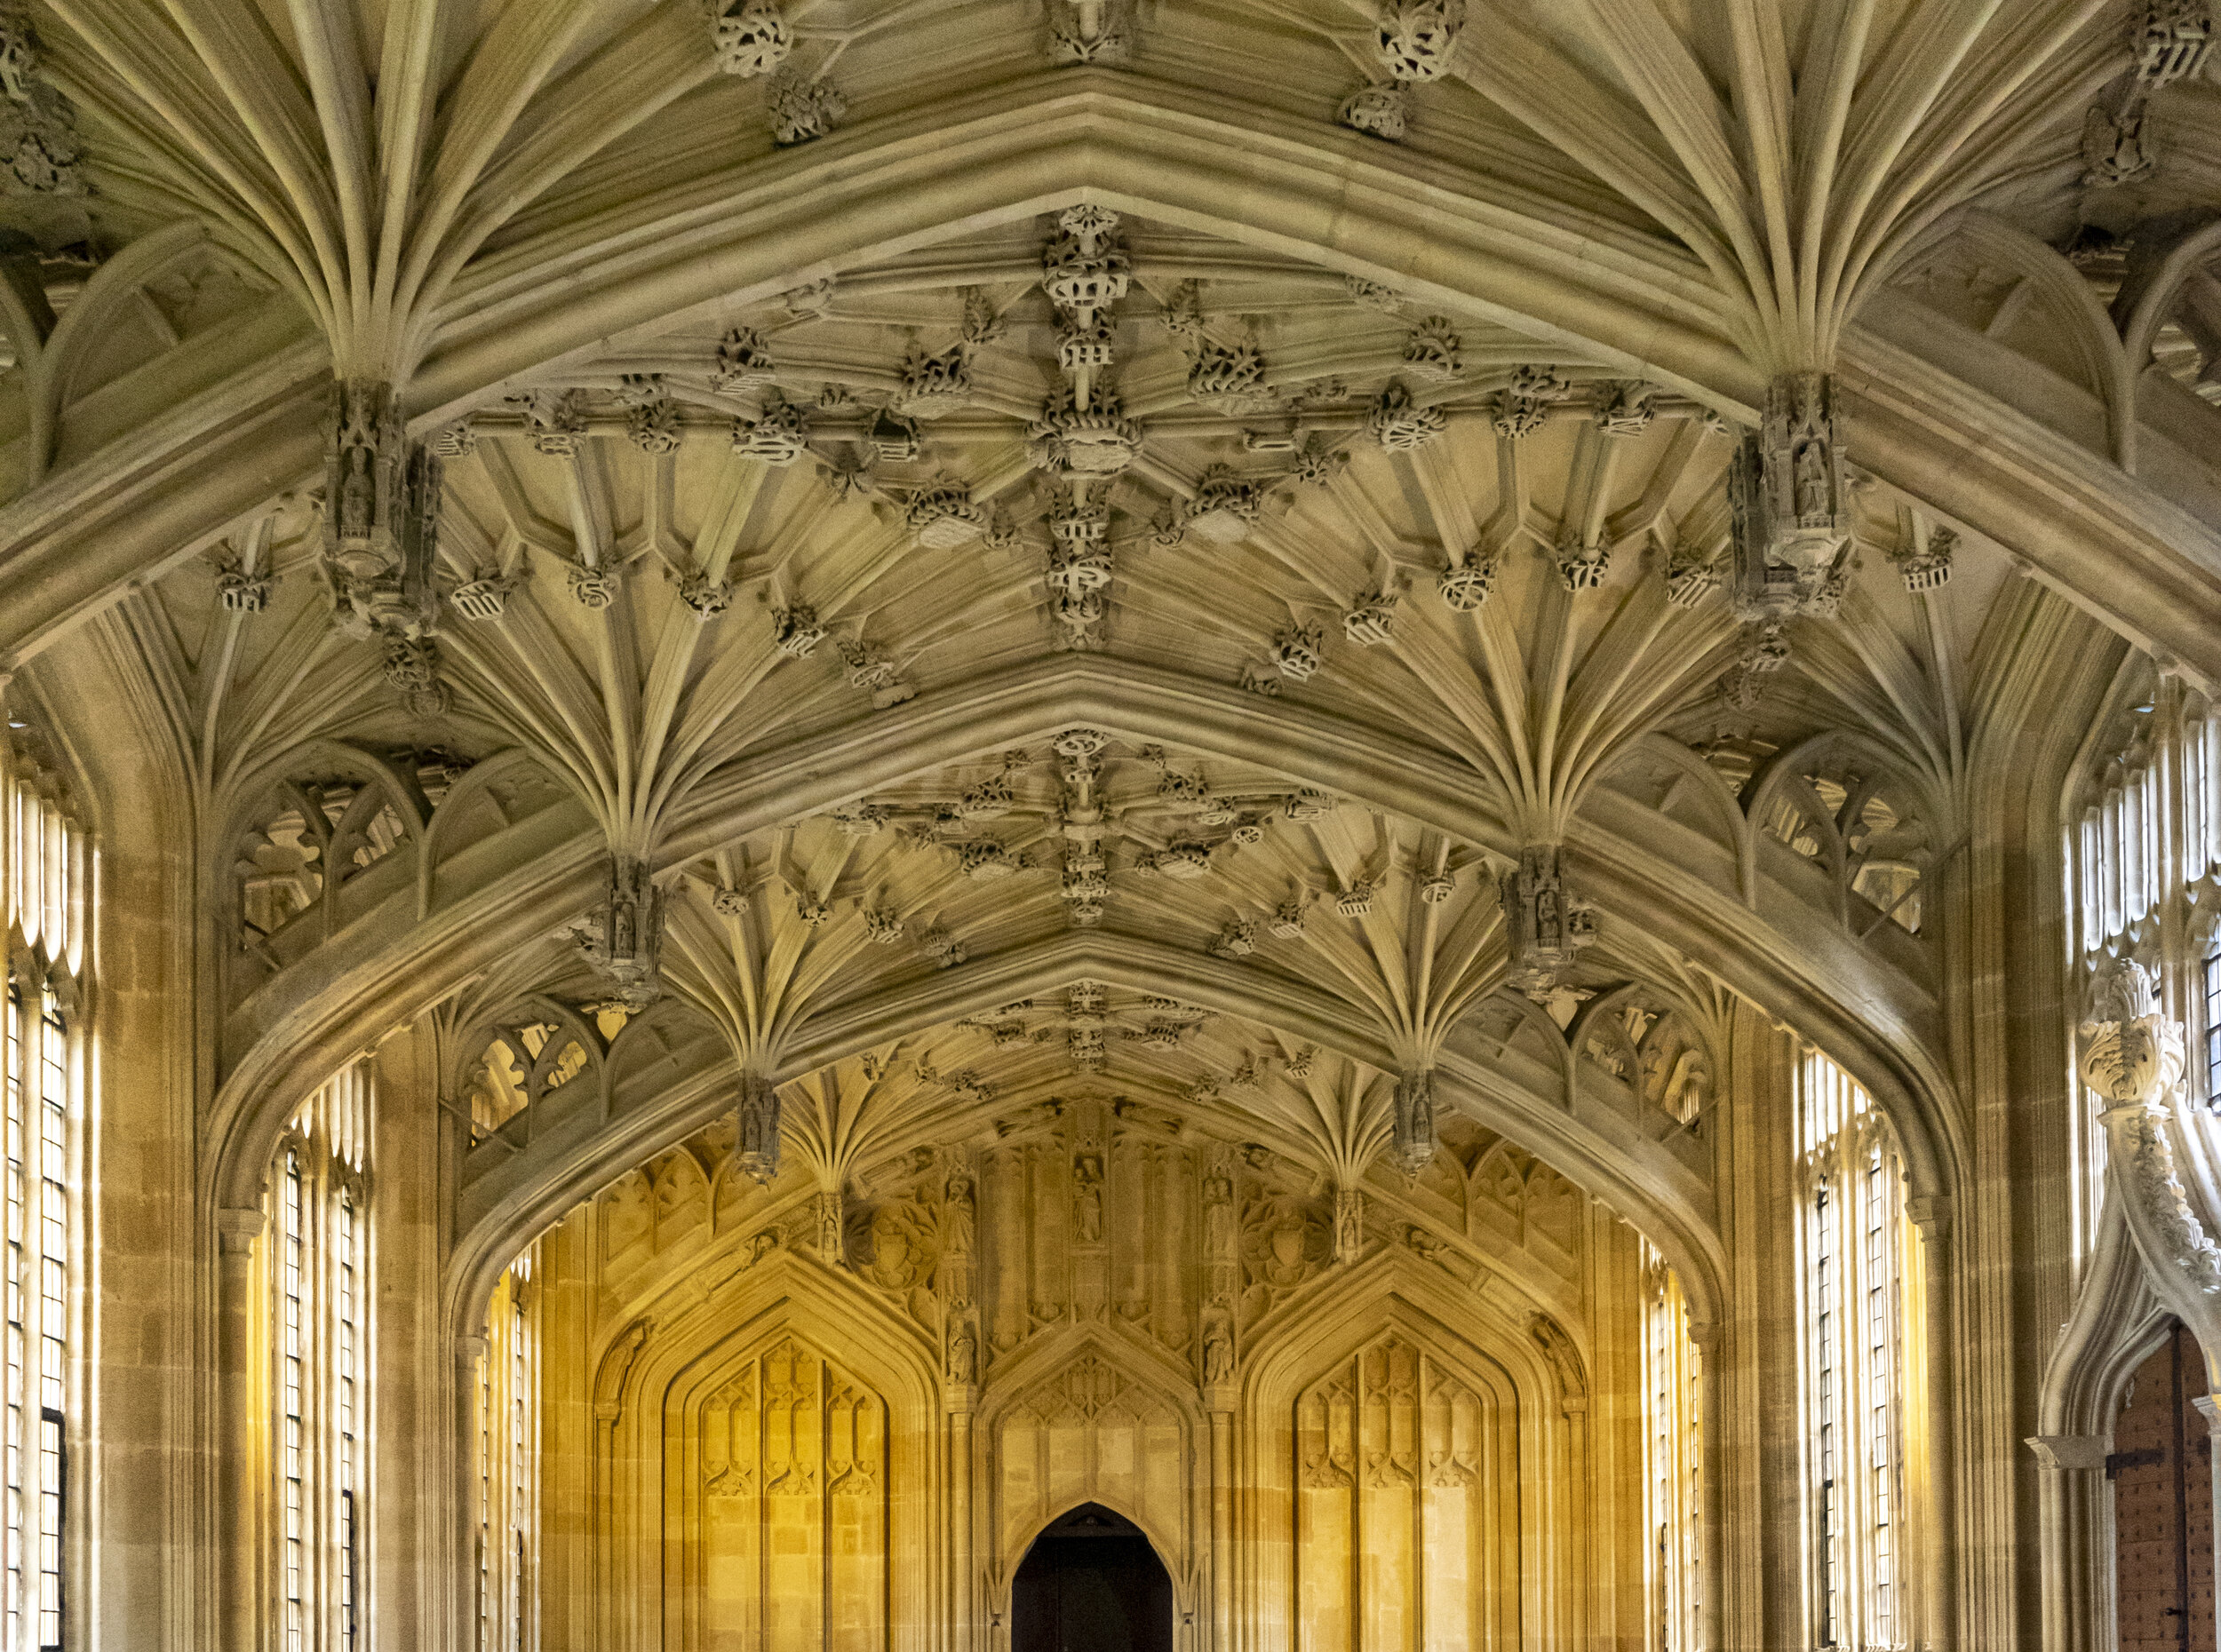  The Bodleian Library, of University of Oxford, was established in 1602 but has roots going back to the 14th century. Its history and stunning architecture make it worth the visit 